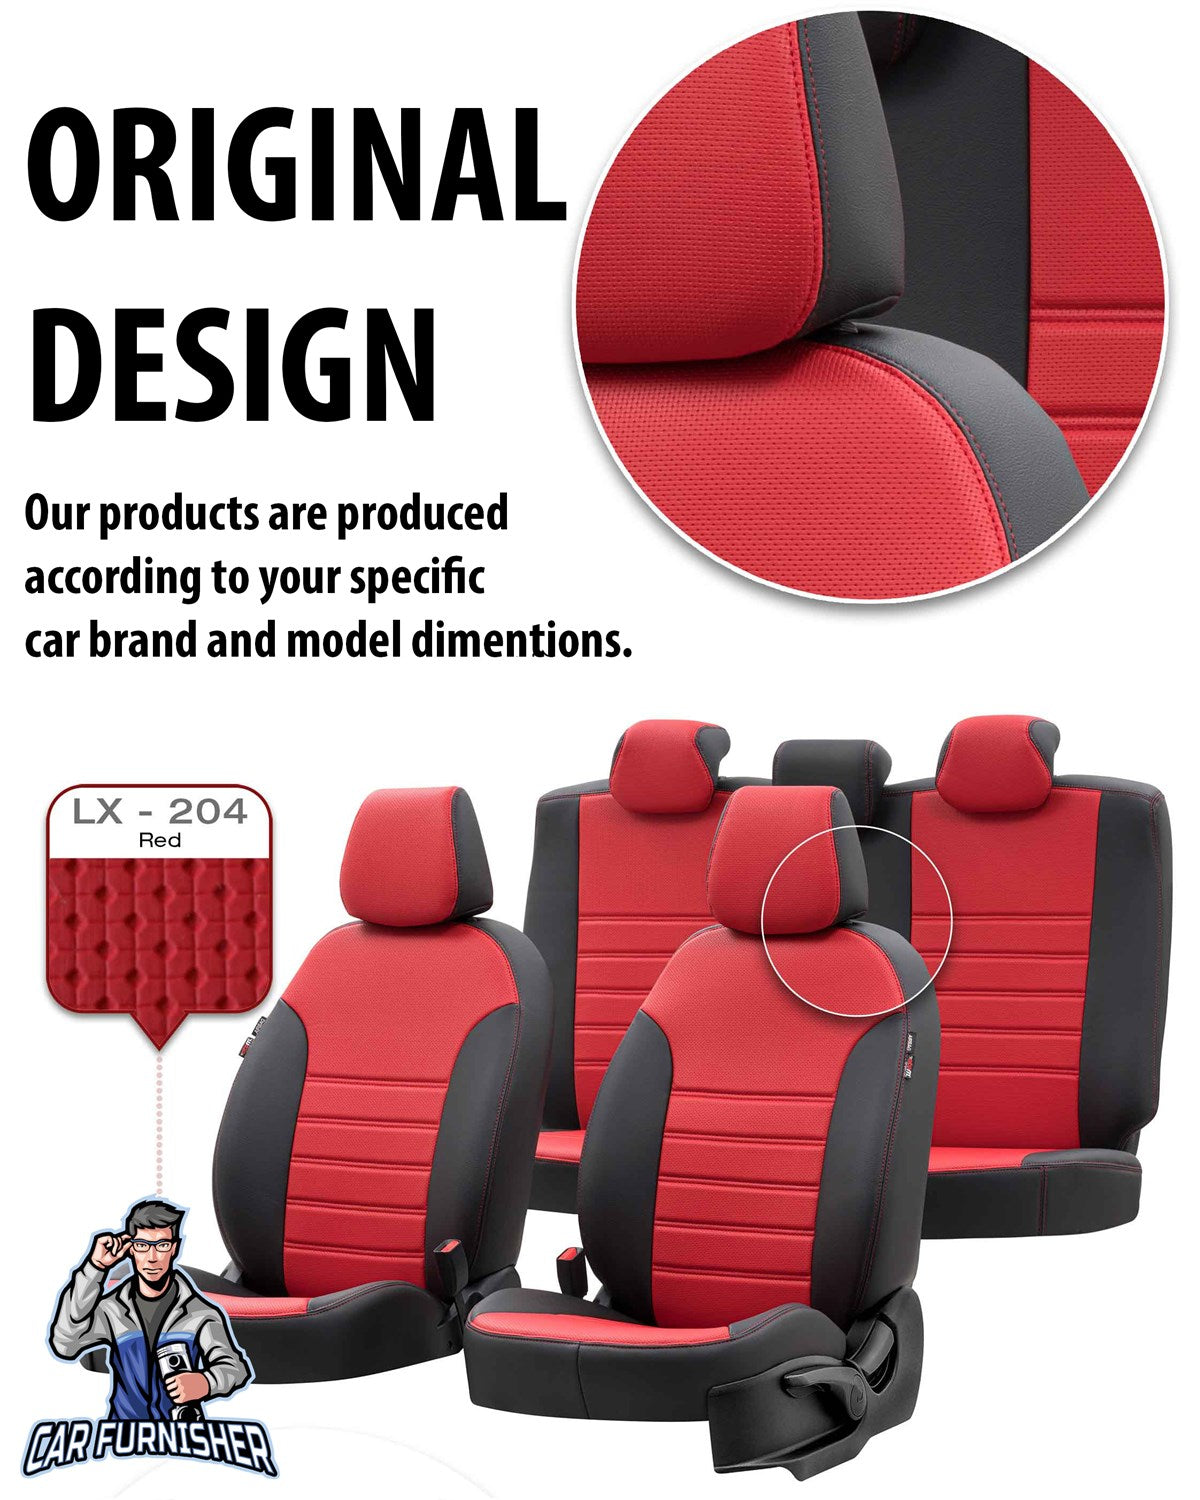 Toyota Land Cruiser Seat Cover New York Leather Design Smoked Leather